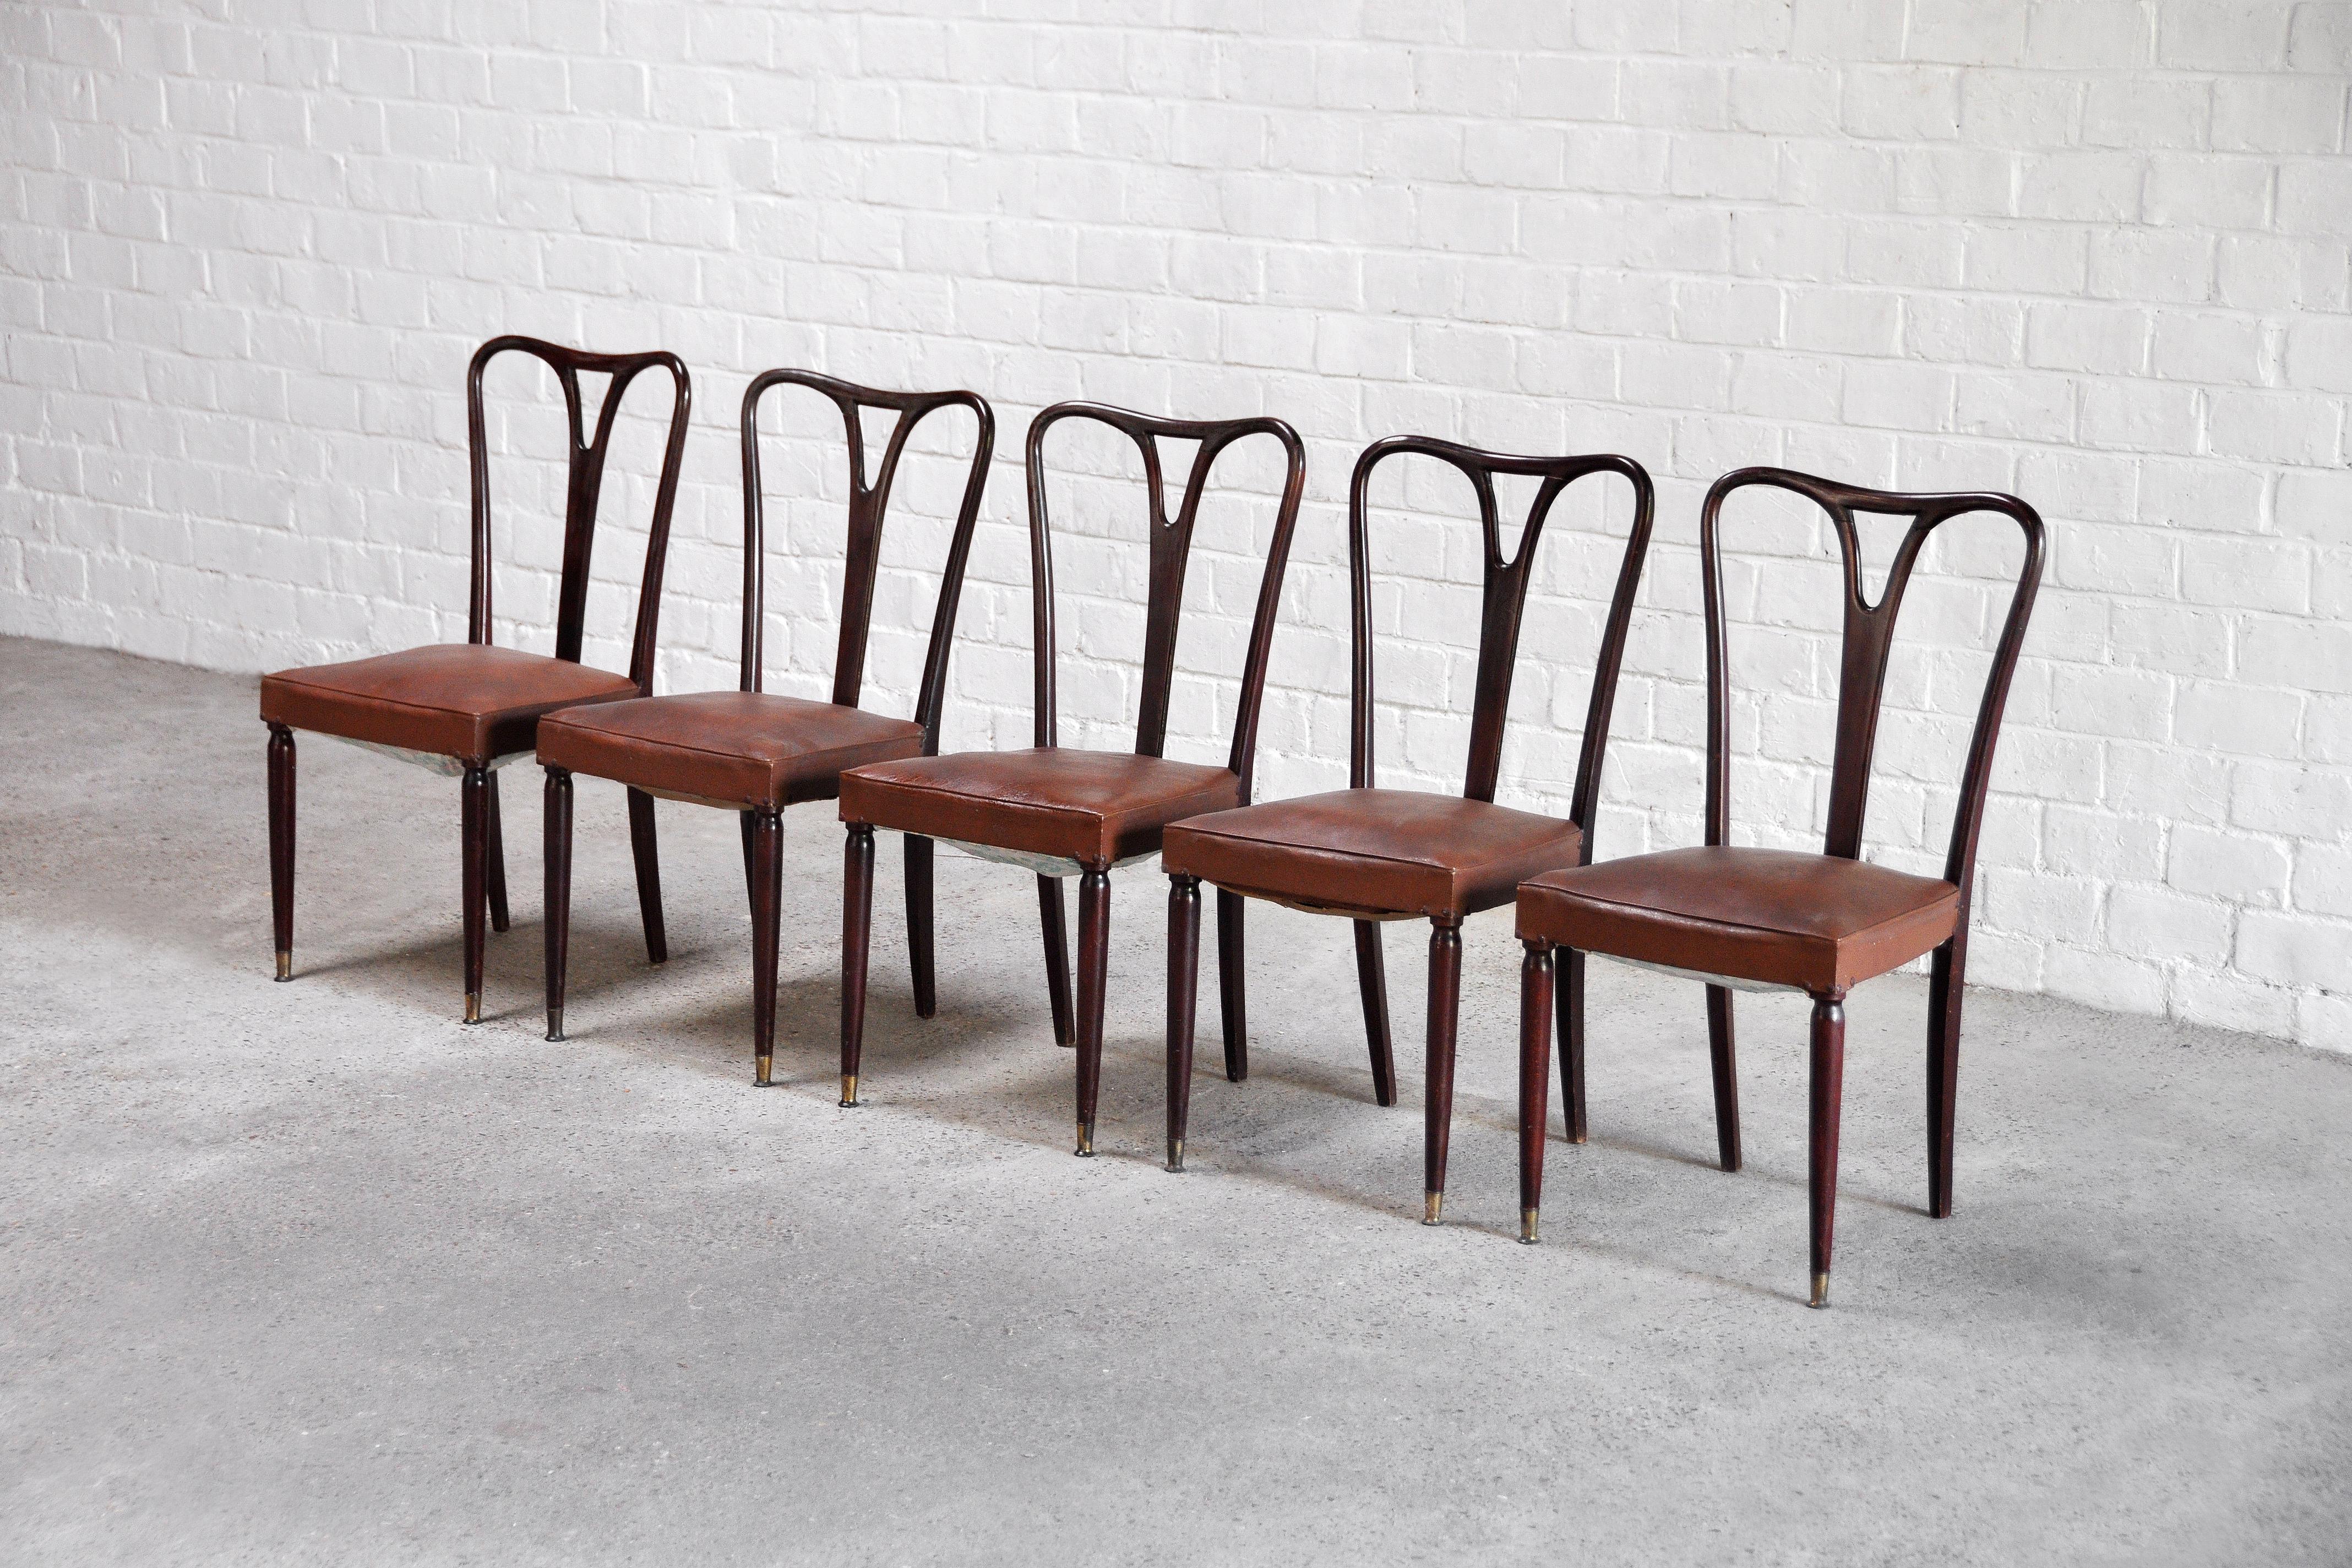 A set of 5 elegant Italian dining chairs attributed to Carlo Enrico Rava, 1950's. These chairs feature a sculptural wooden frame accented with brass tips and retain their original padded leather seats. 

In original condition, wear consistent with